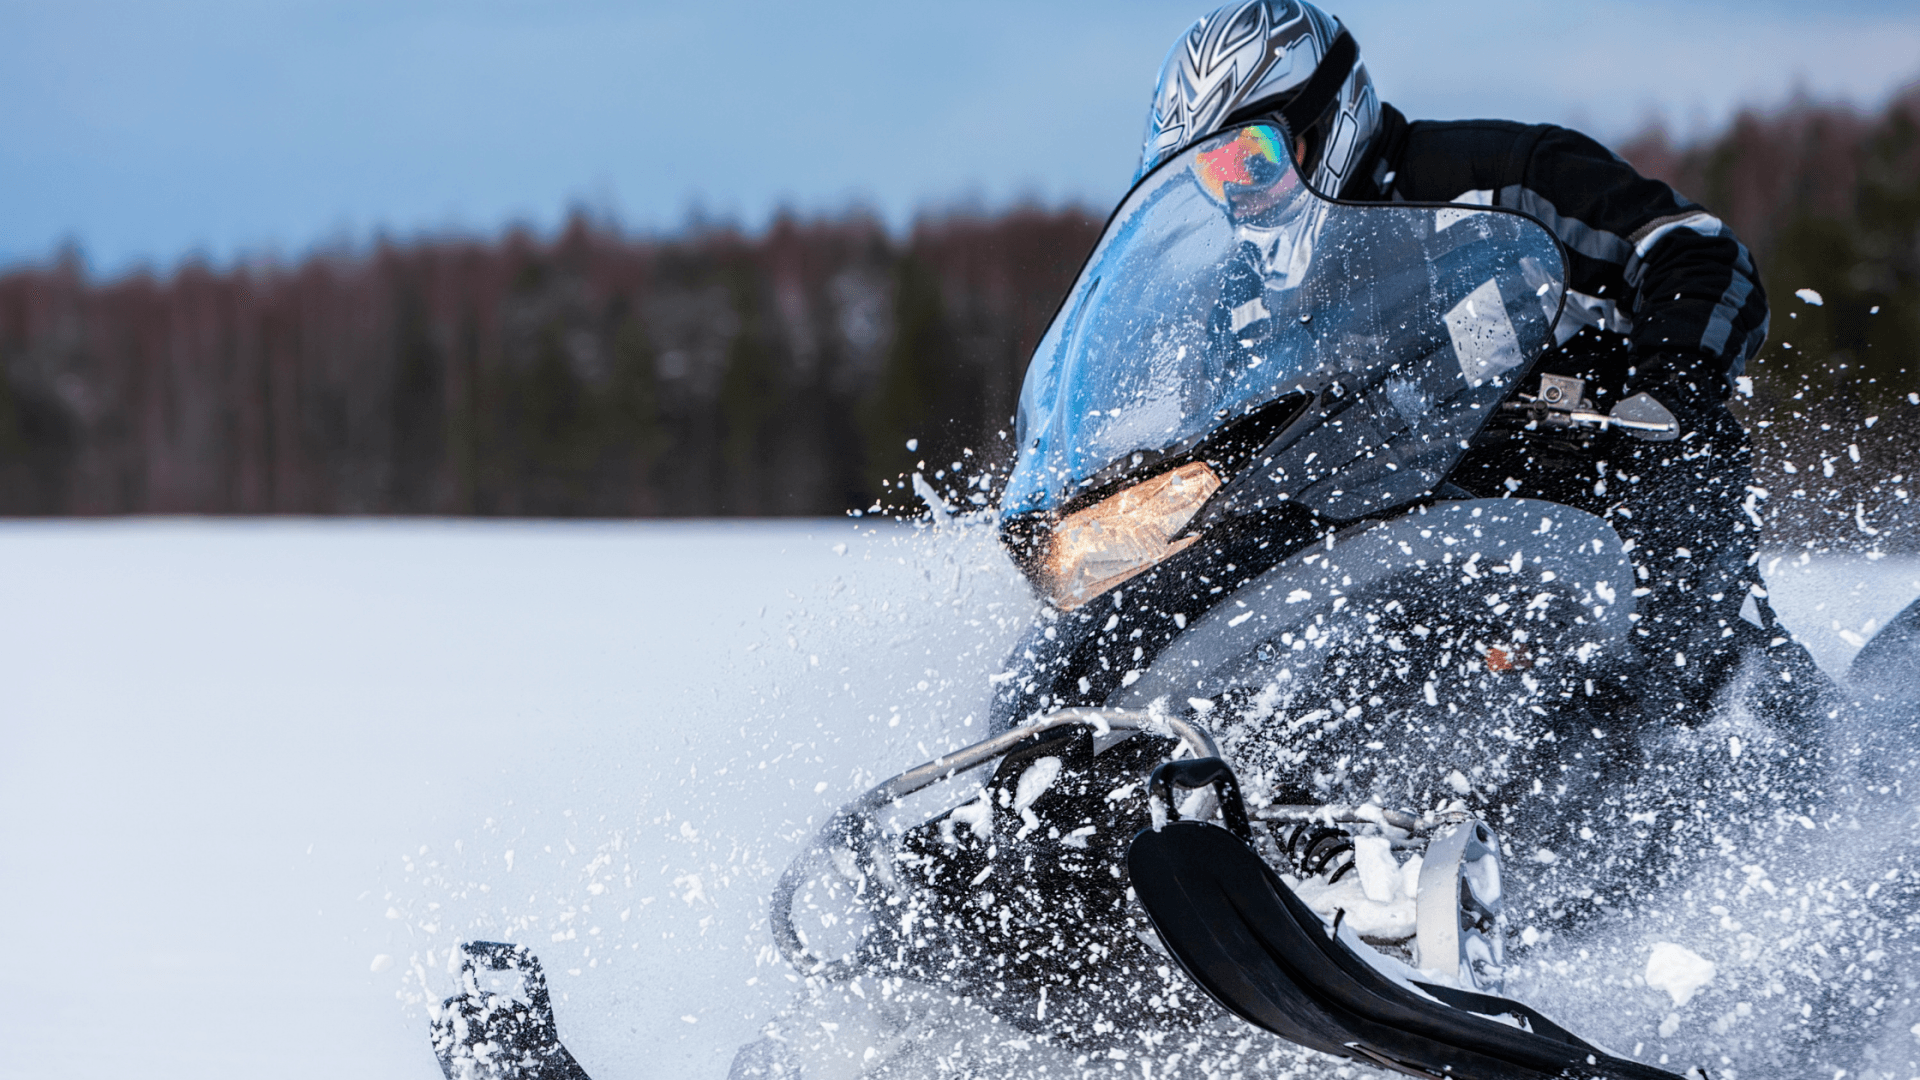 Why You Need Snowmobile Insurance